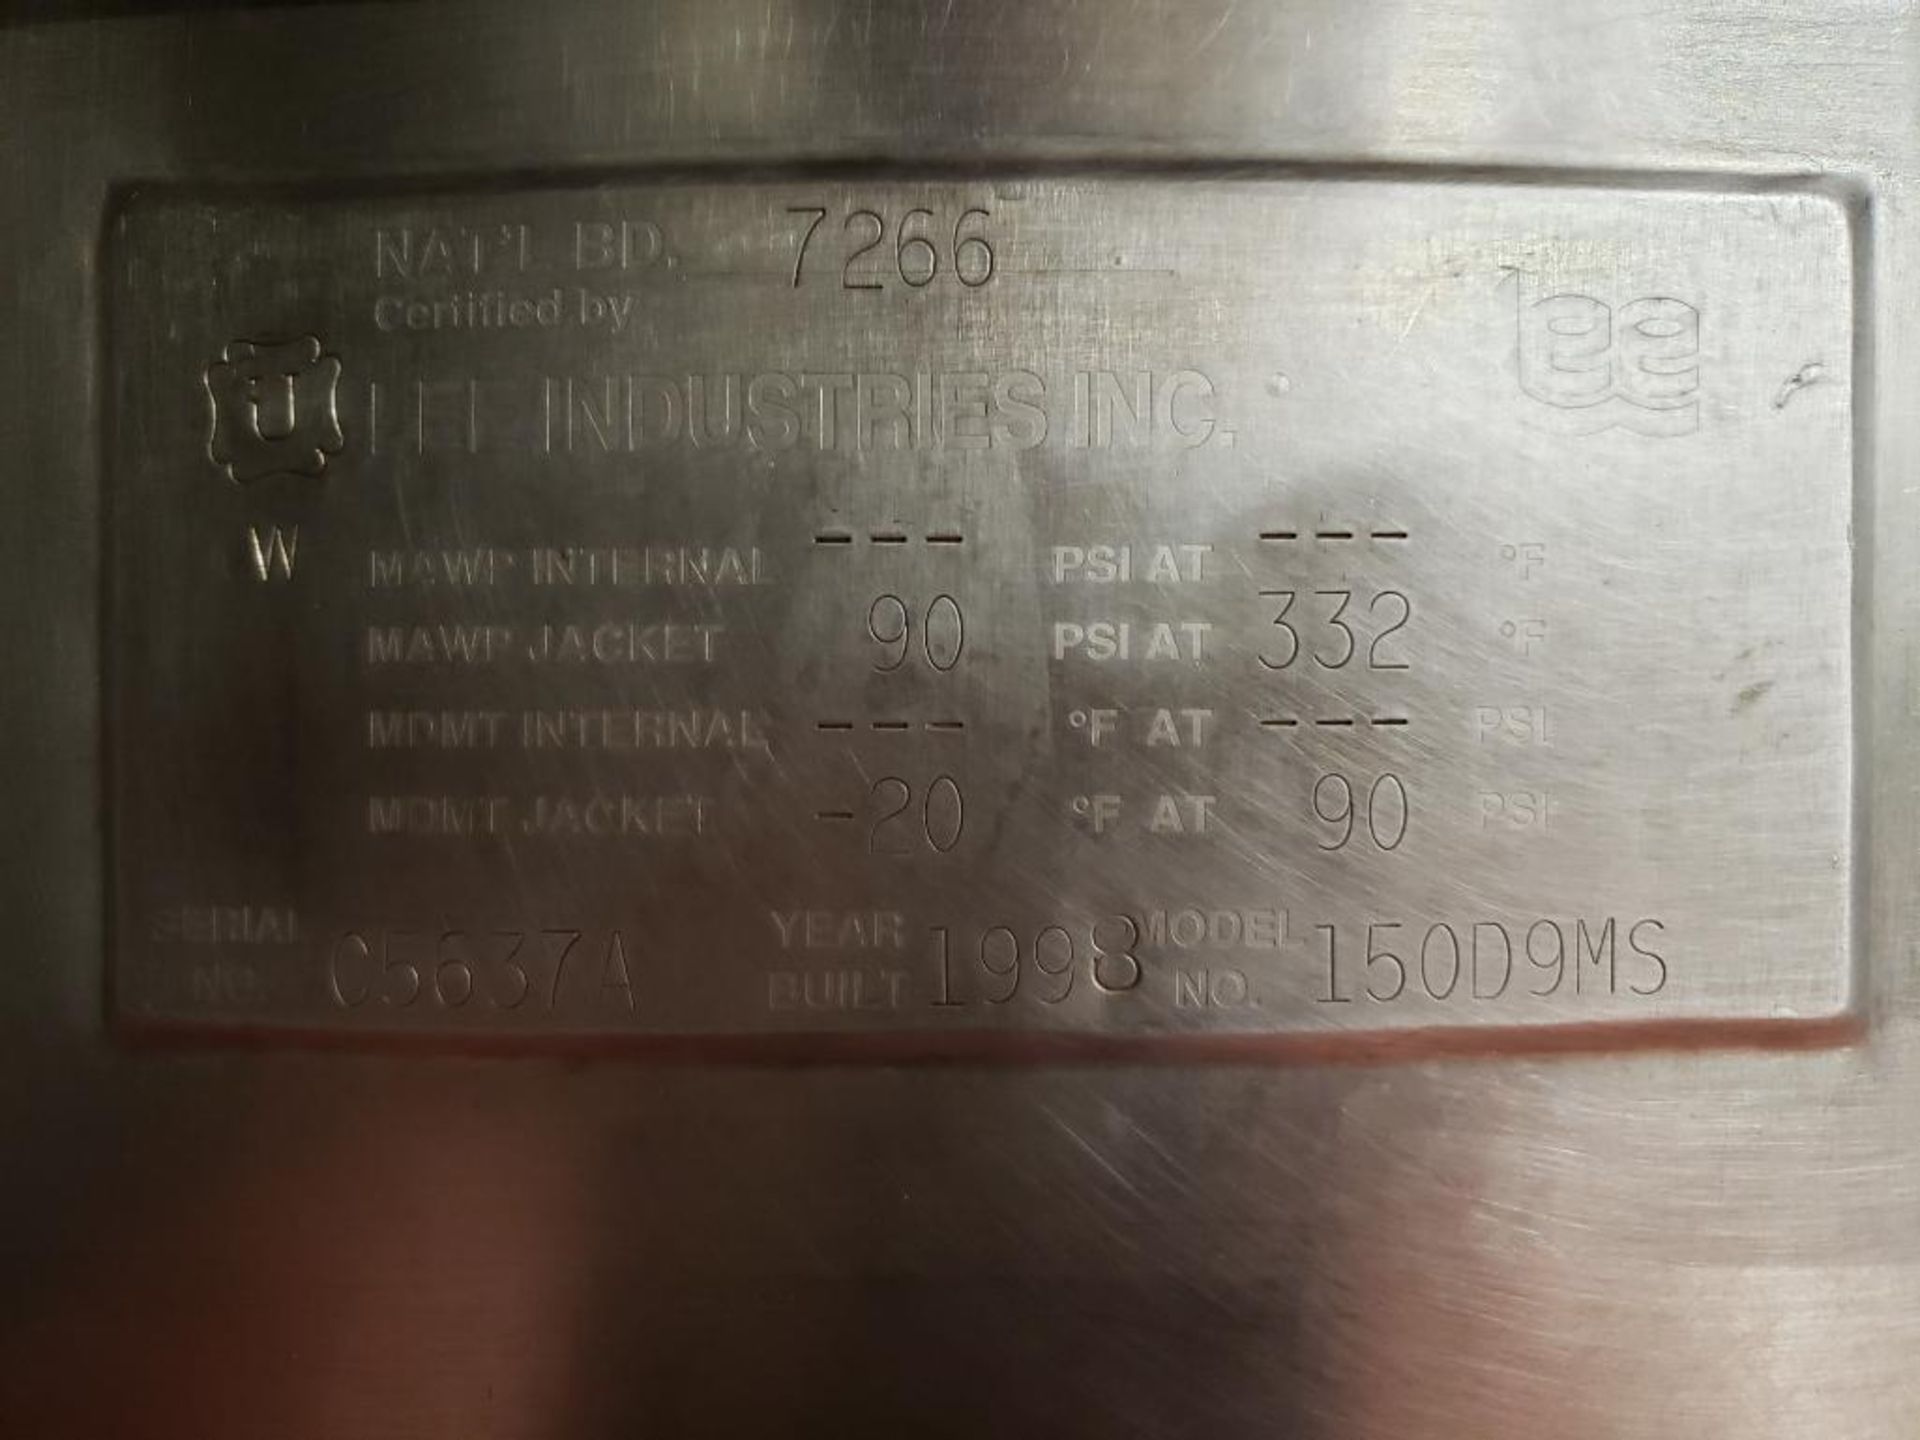 Lee Industries Stainless Steel Jacketed Kettle - Image 2 of 5